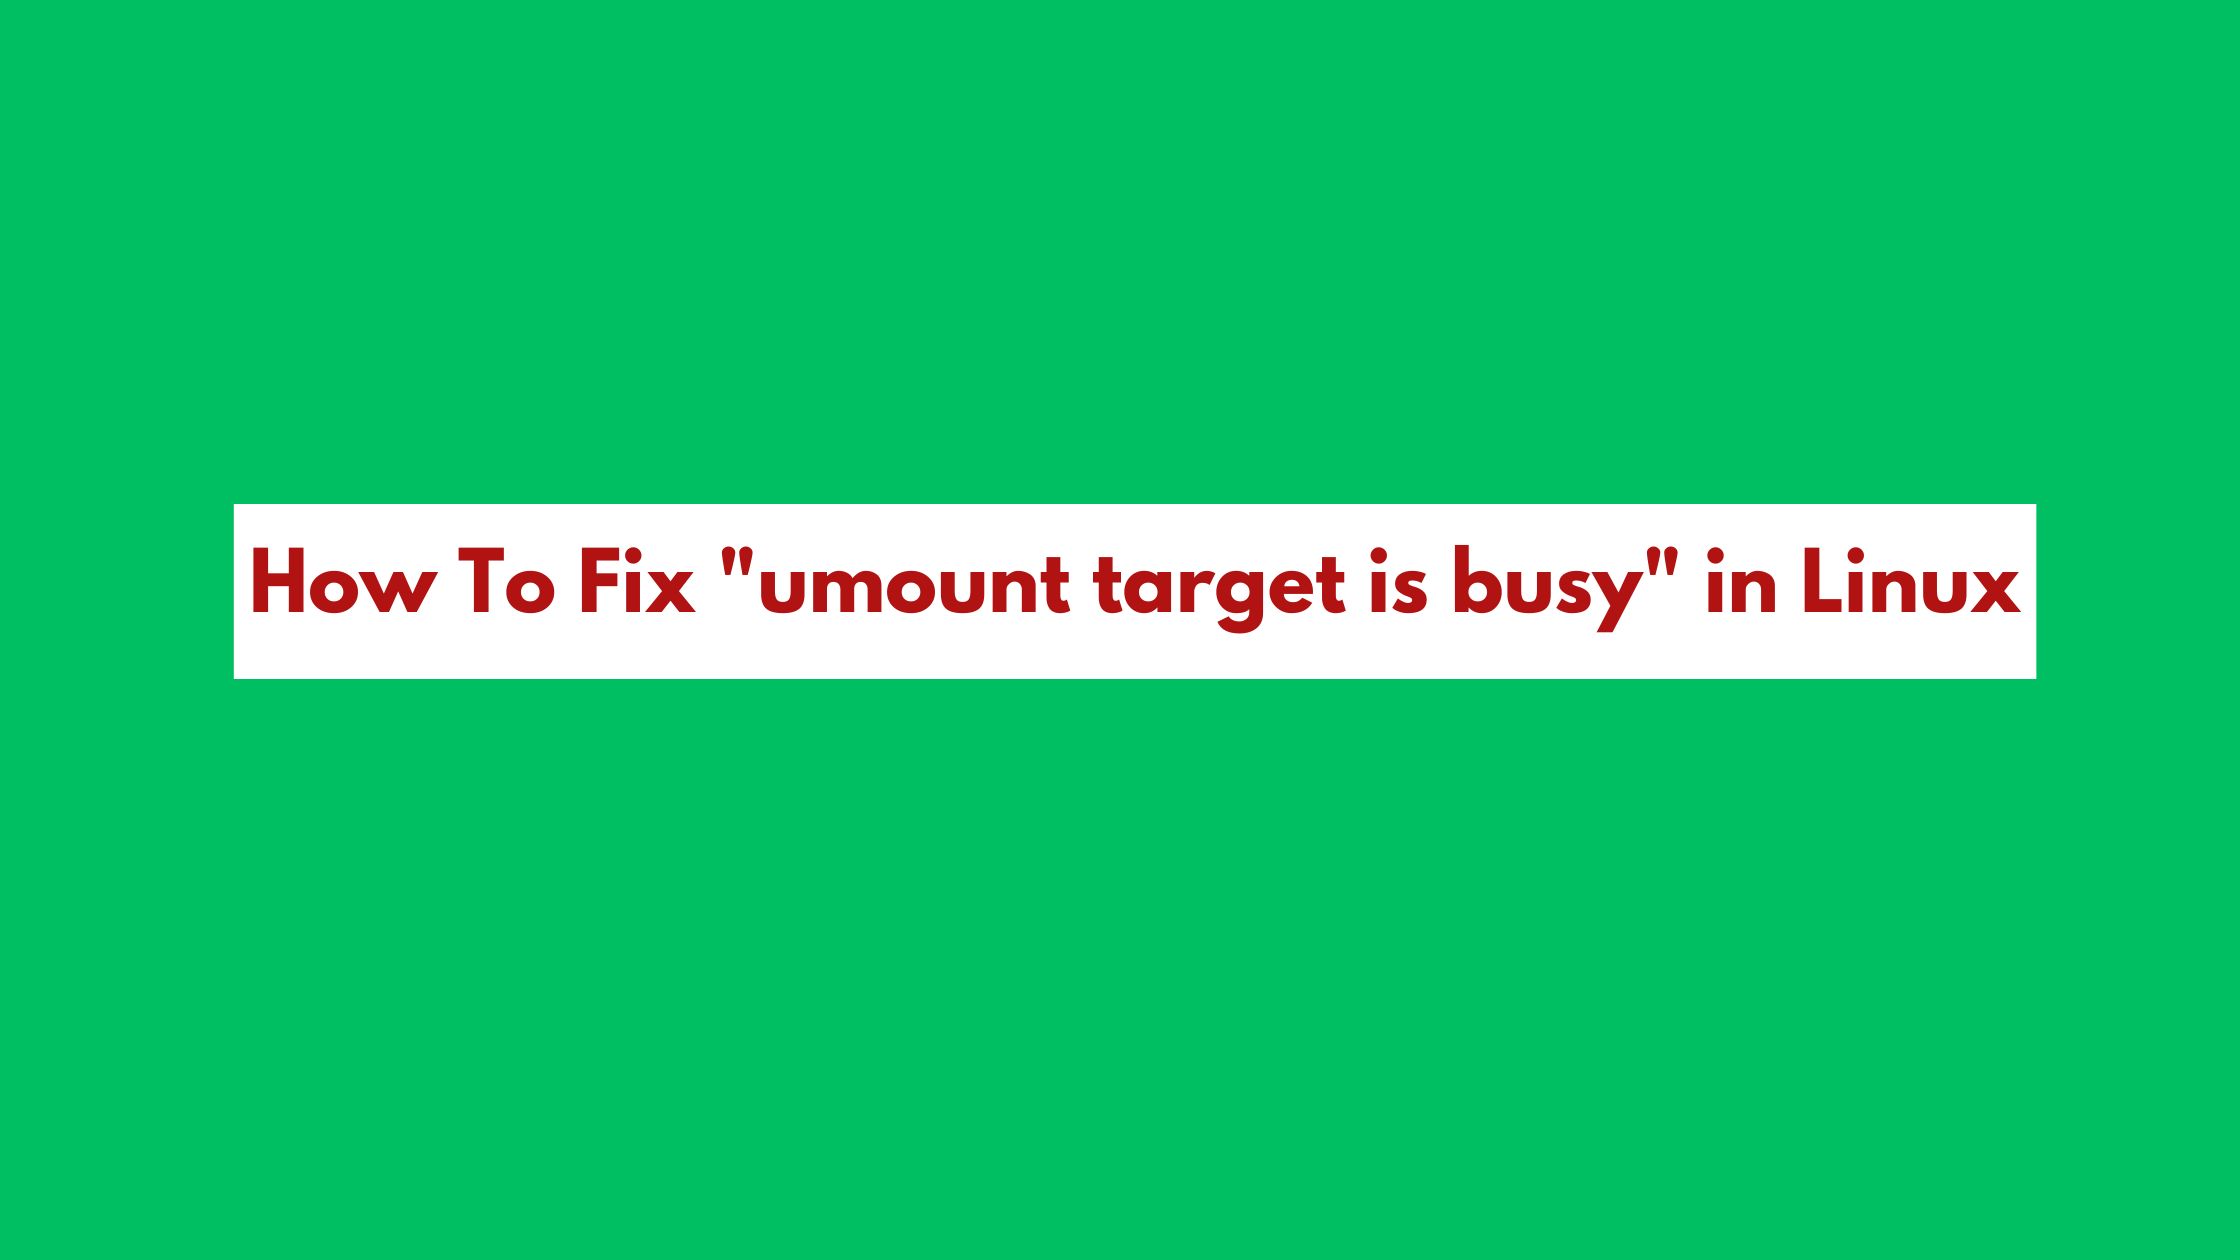 How To Fix "umount target is busy" in Linux